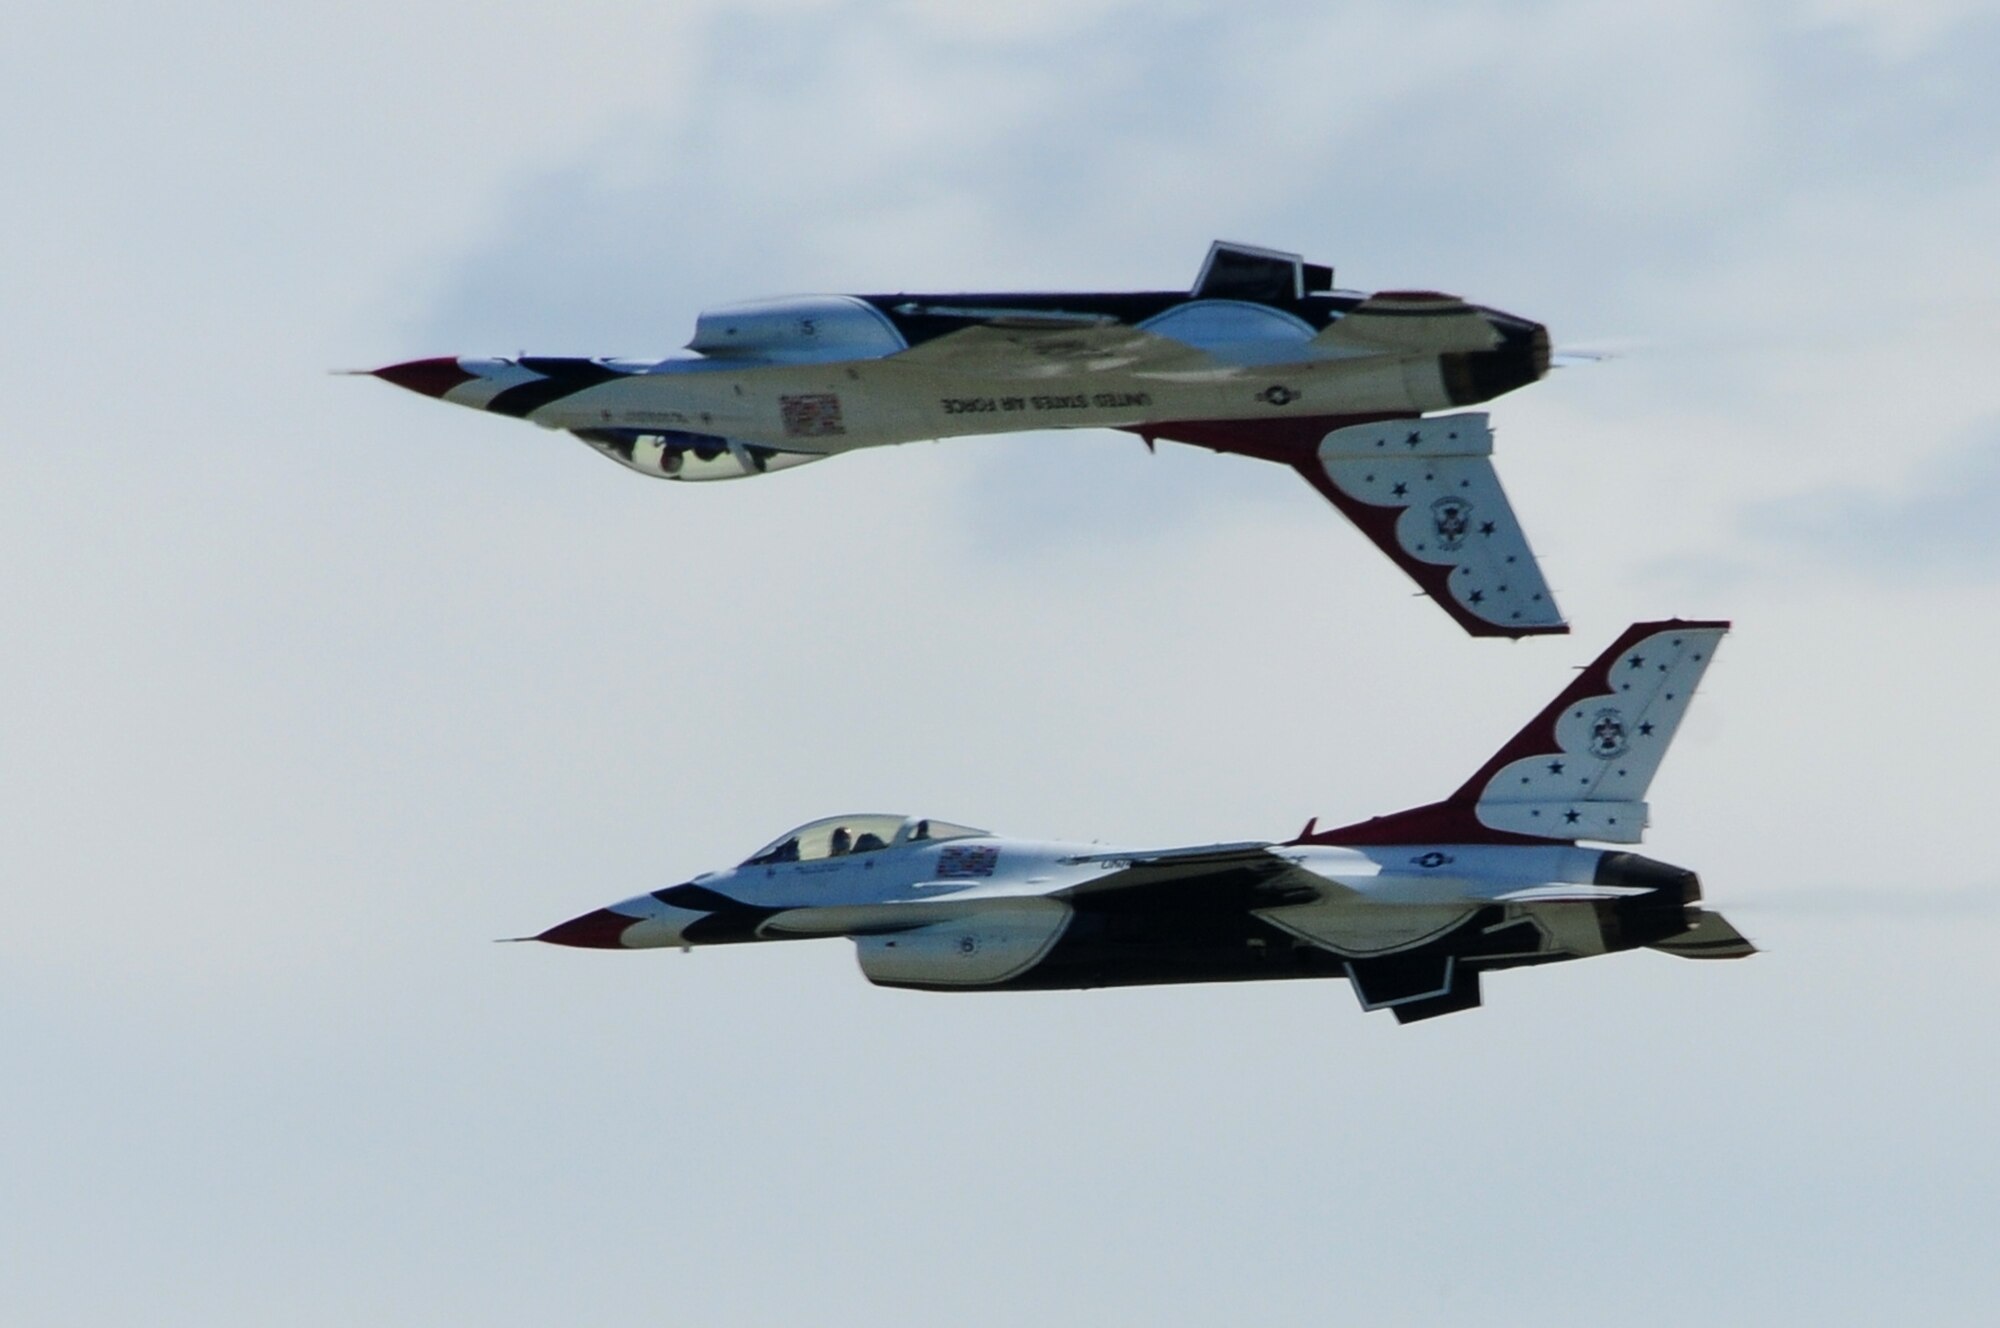 The USAF Thundebirds perform at the Thunder of Niagara Airshow September 10, 2011, Niagara Falls, NY.  The Thunderbirds demonstrate the capabilities of modern, warfighting aircraft and  represent the men and women of the United States Air Force serving around the globe.   (U.S. Air Force photo by Senior Airman Jessica Mae Snow)